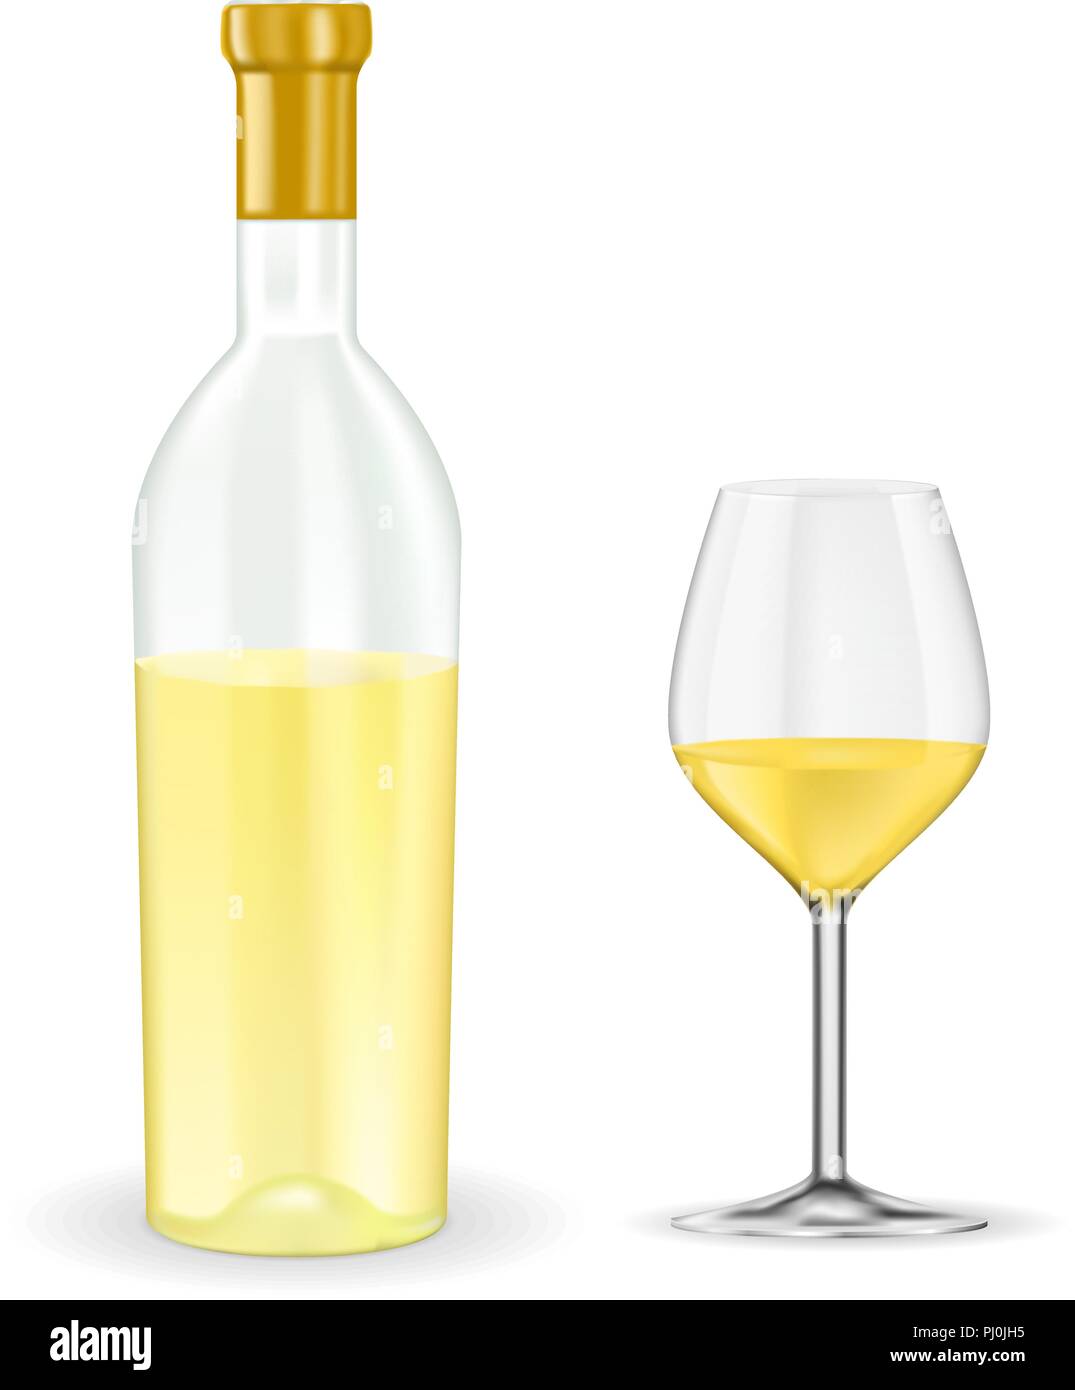 Open bottle of white wine with glass Stock Vector